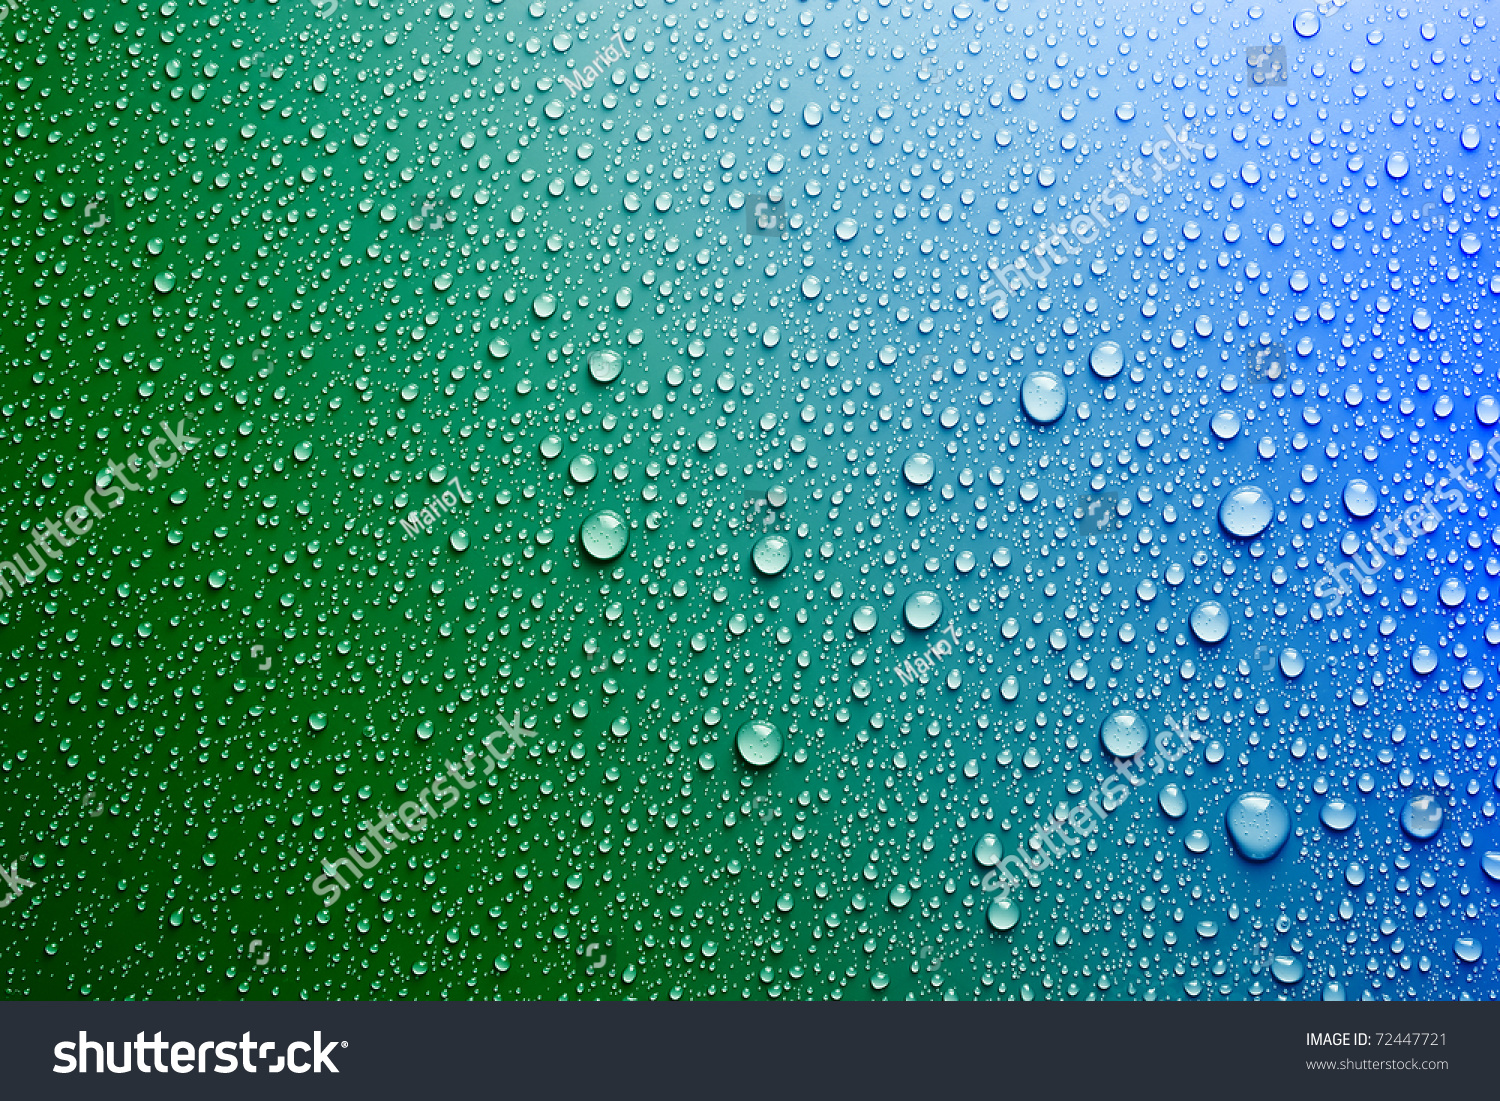 Blue Water Drops Background Texture Stock Photo 72447721 : Shutterstock